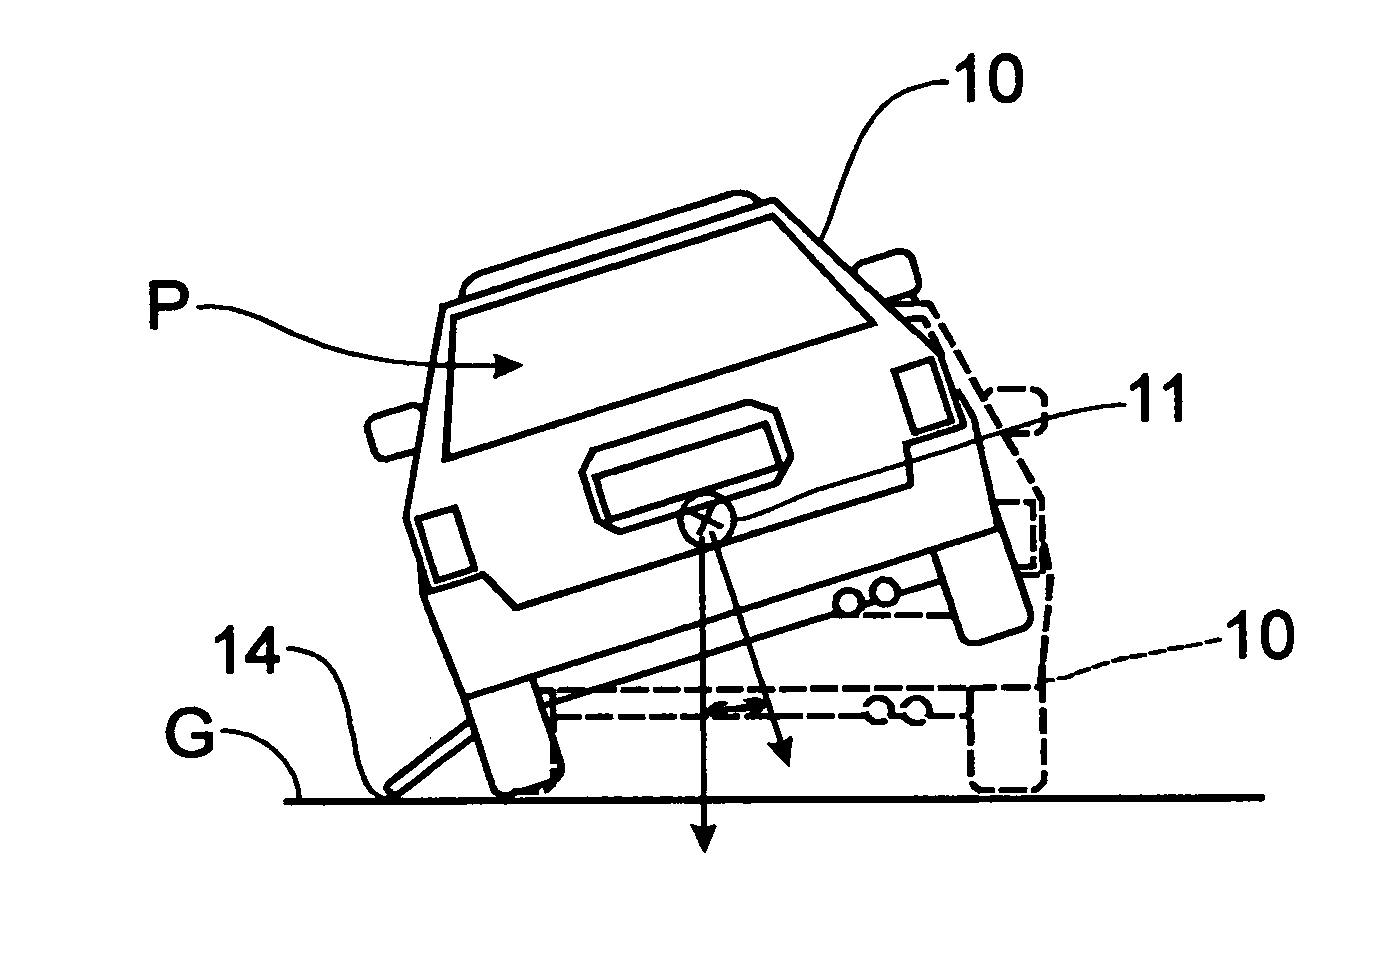 Actuation mechanism for the deployment of a laterally extendable running board to provide rollover resistance